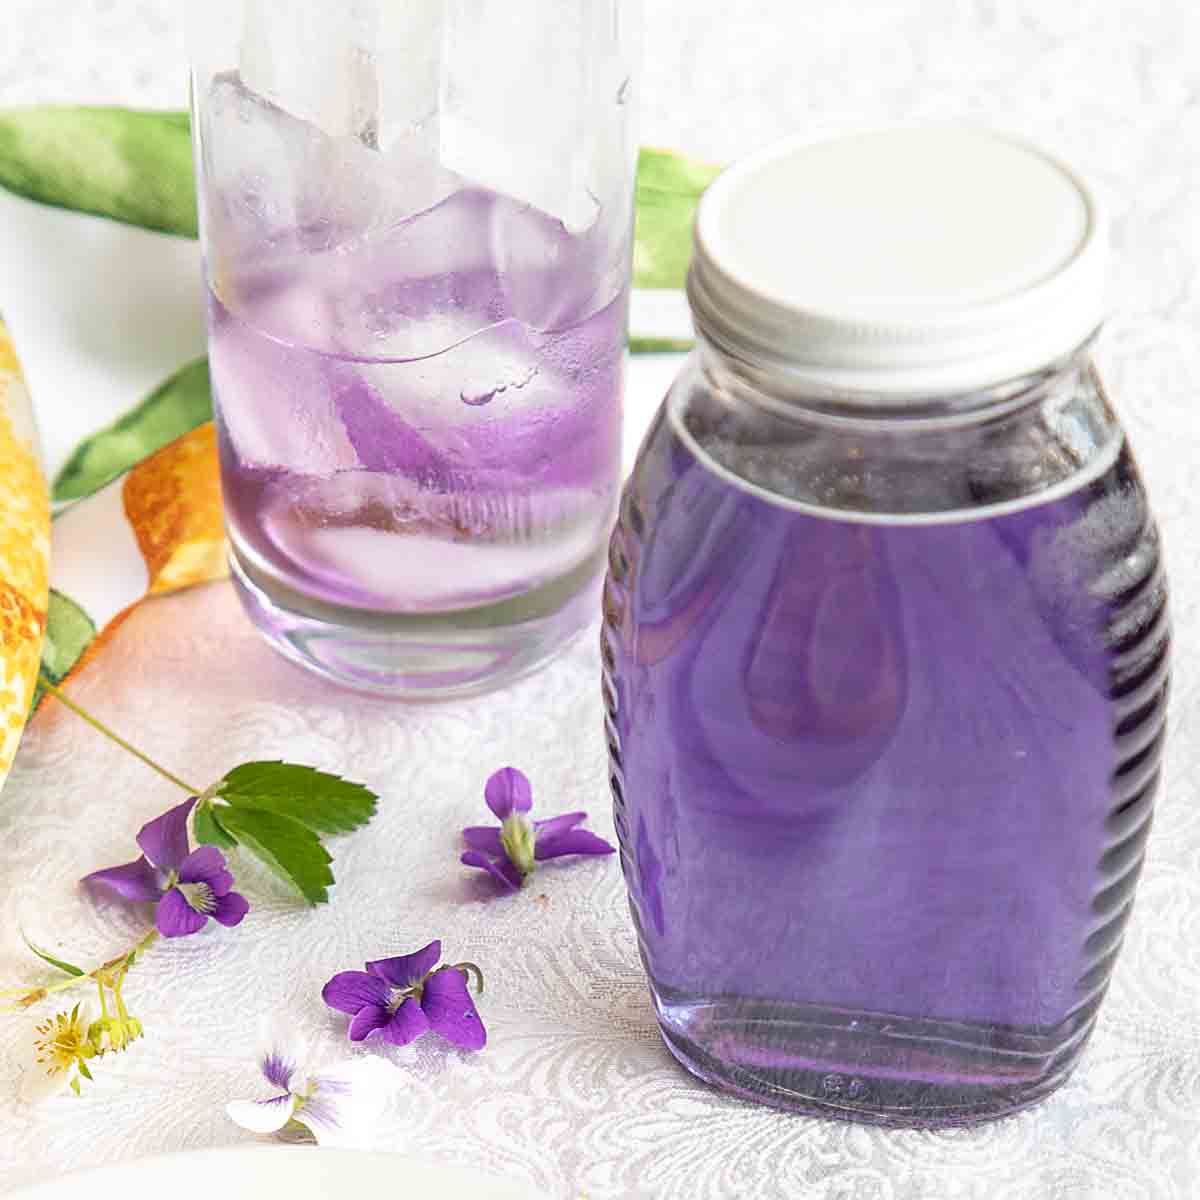 Find A Recipe For Easy Wild Violet Syrup Art Of Natural Living On Trivet Recipes A Recipe